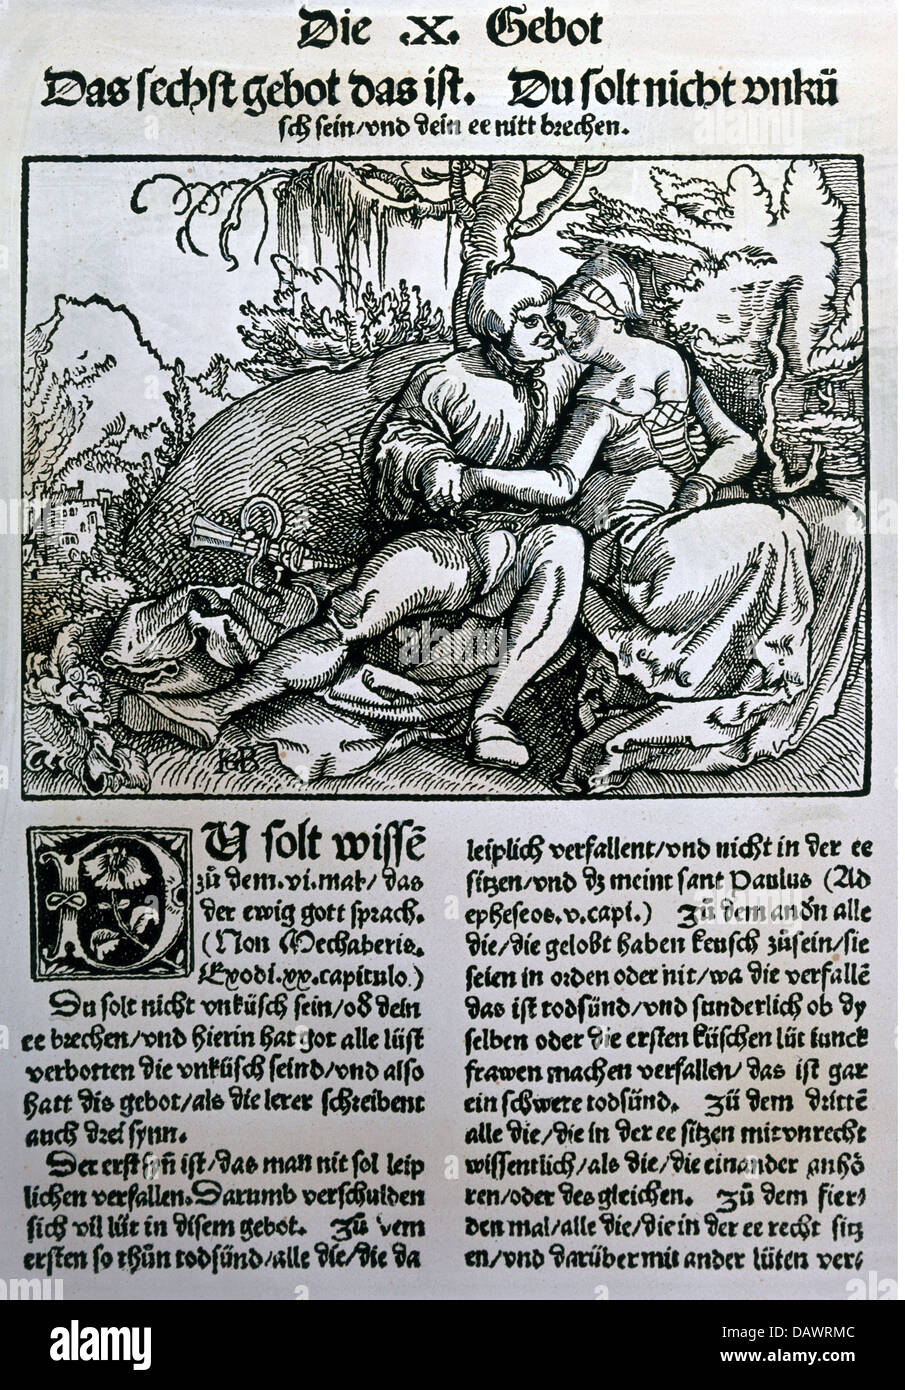 people, couple, lovers, woodcut by Hans Baldung Grien, 'Die zehen gebot erclert und usgelegt', 6th Commandment, 'Though shalt not be unchaste', printed by Hans Grueninger, Strassbourg, 1516, private collection, Additional-Rights-Clearences-Not Available Stock Photo